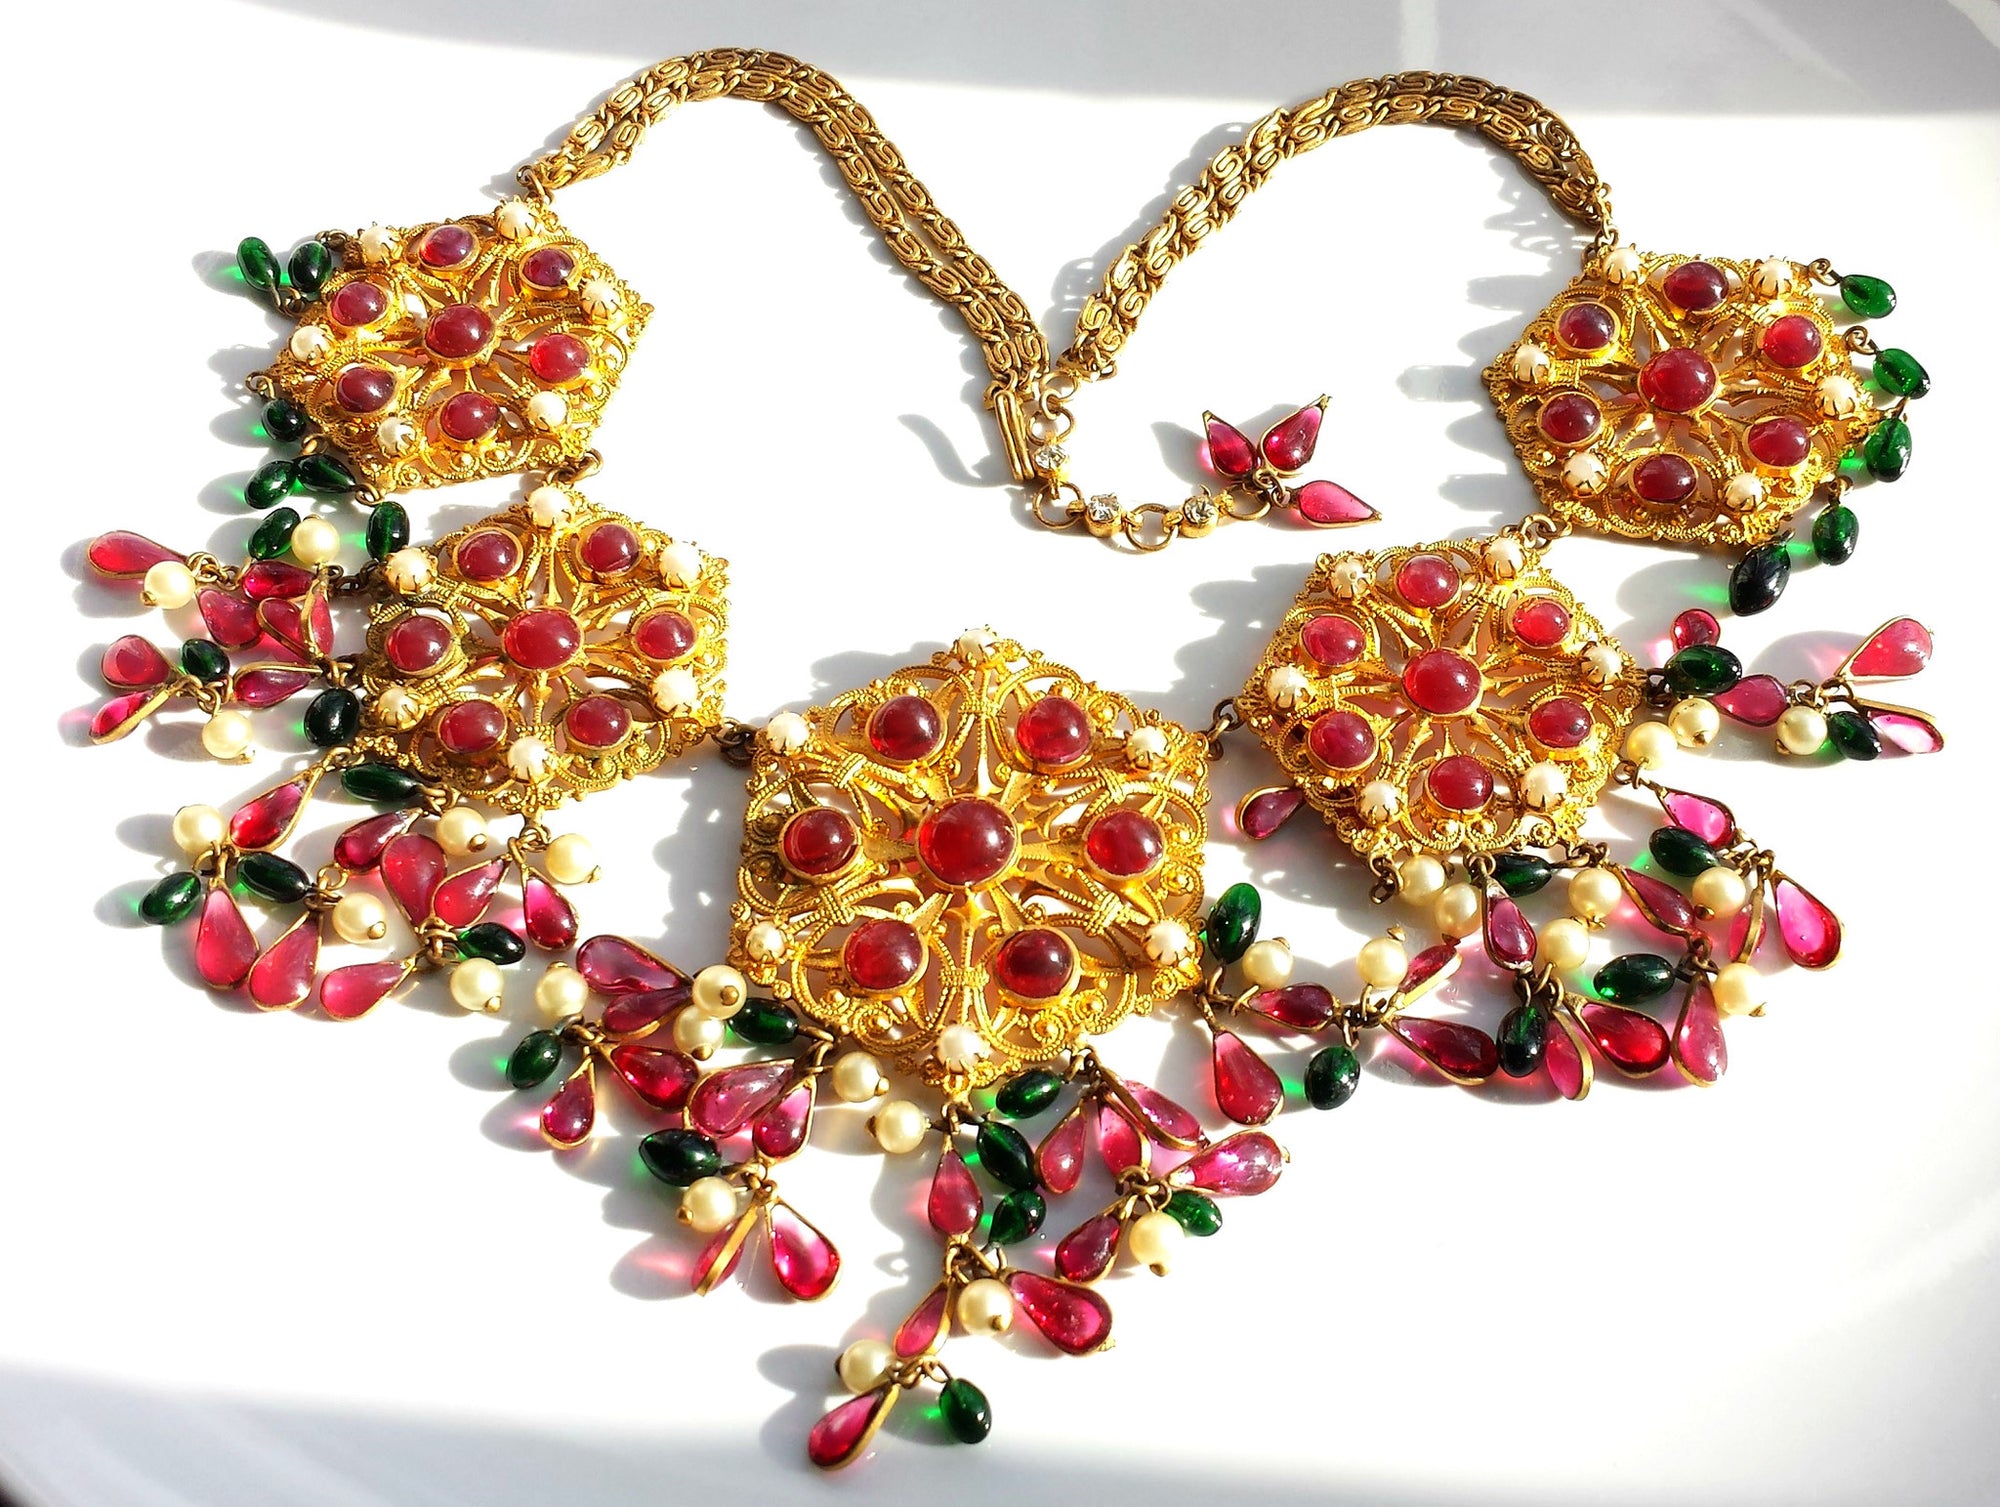 Important Vintage 1940s Chanel Gripoix Mughal/Moghul Ruby Emerald